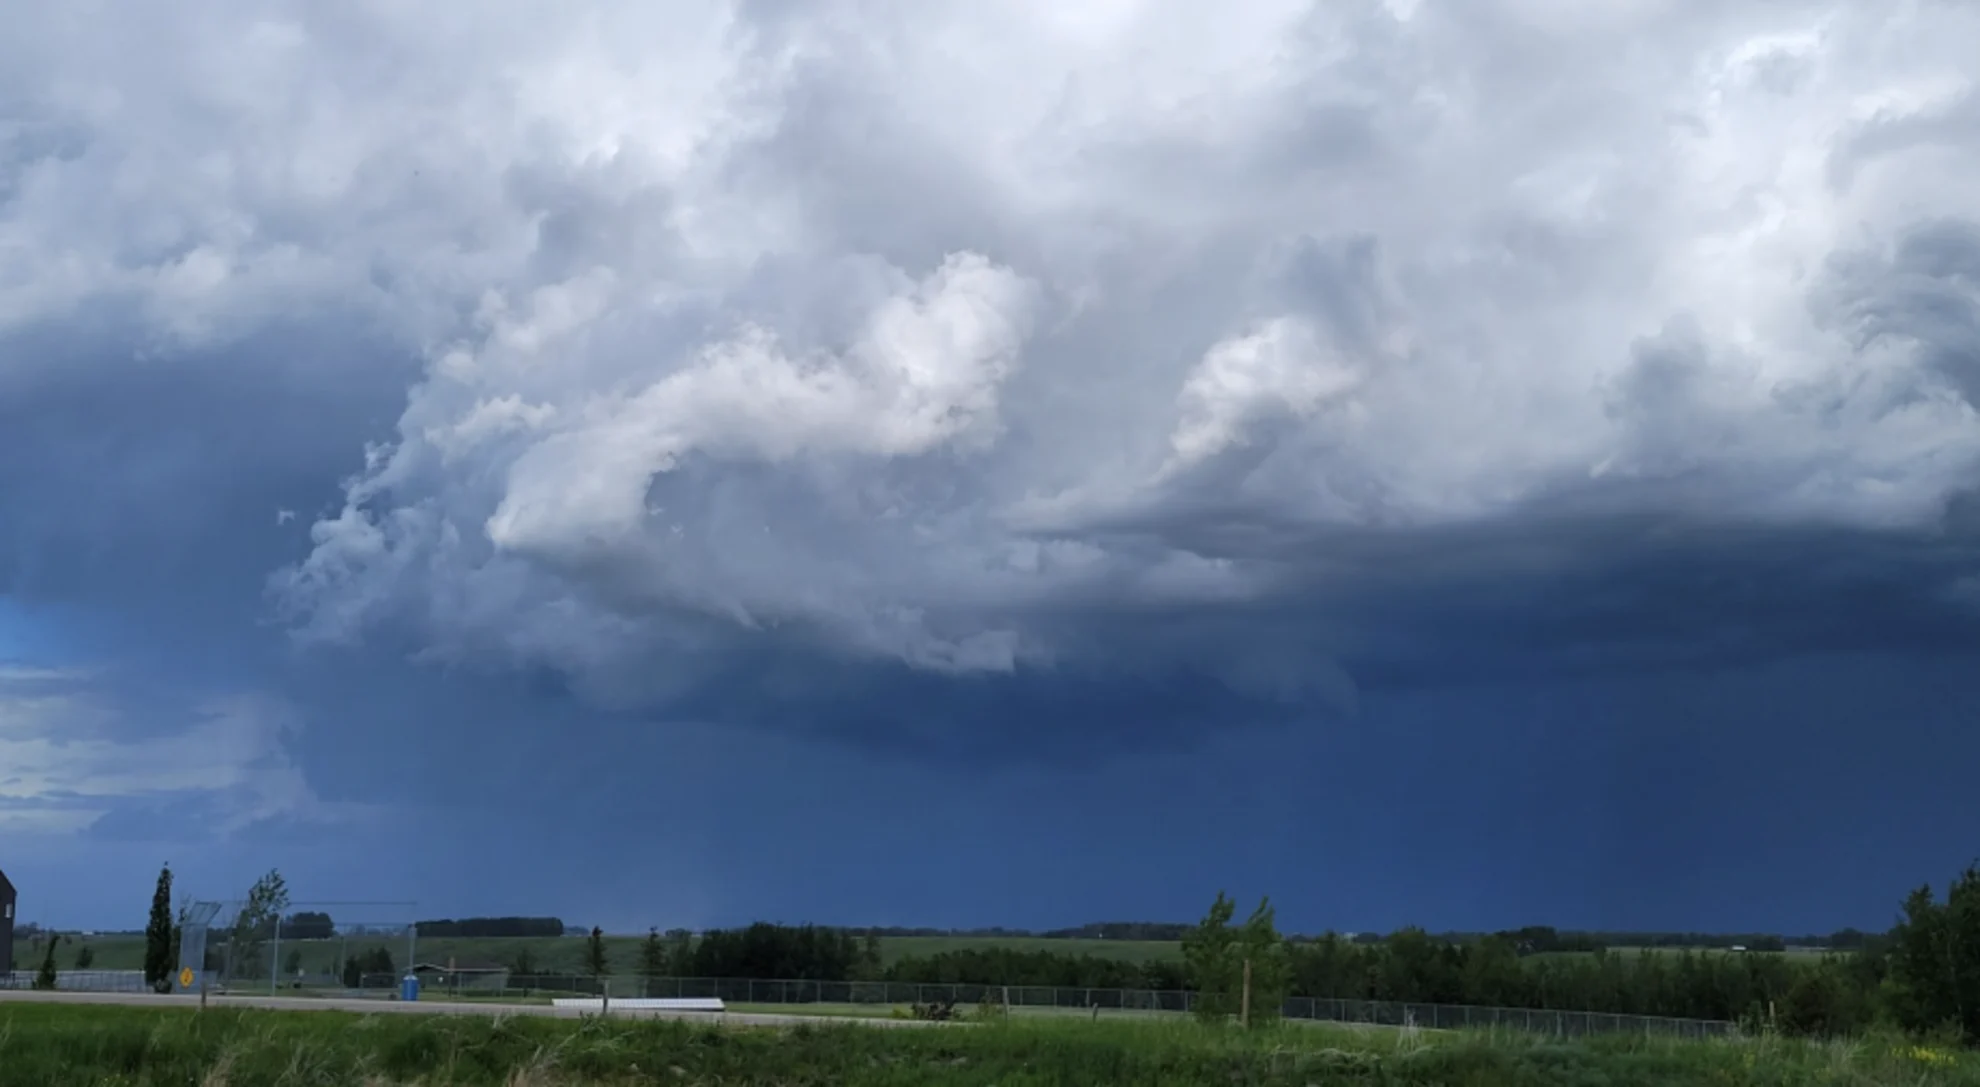 A severe thunderstorm threat covers parts of Saskatchewan this week, with the risk for damaging winds, and hail. Timing, here